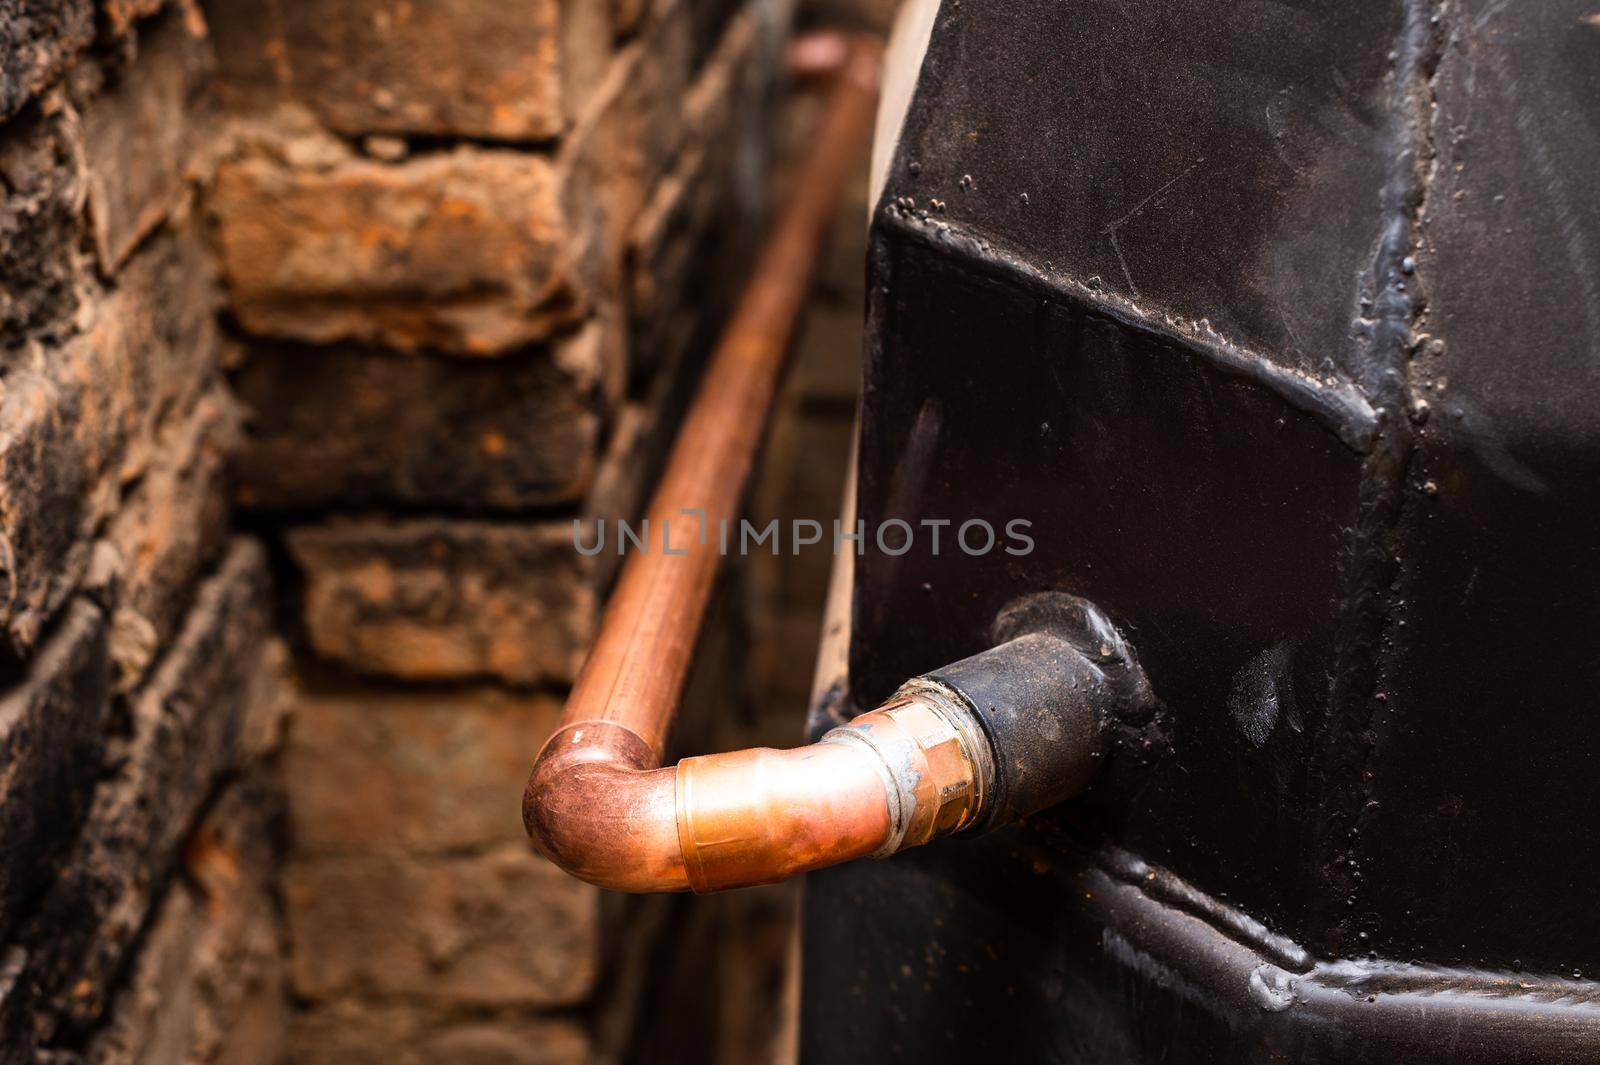 Installation of copper pipes for water supply to the fireplace, heating in the house with a fireplace.